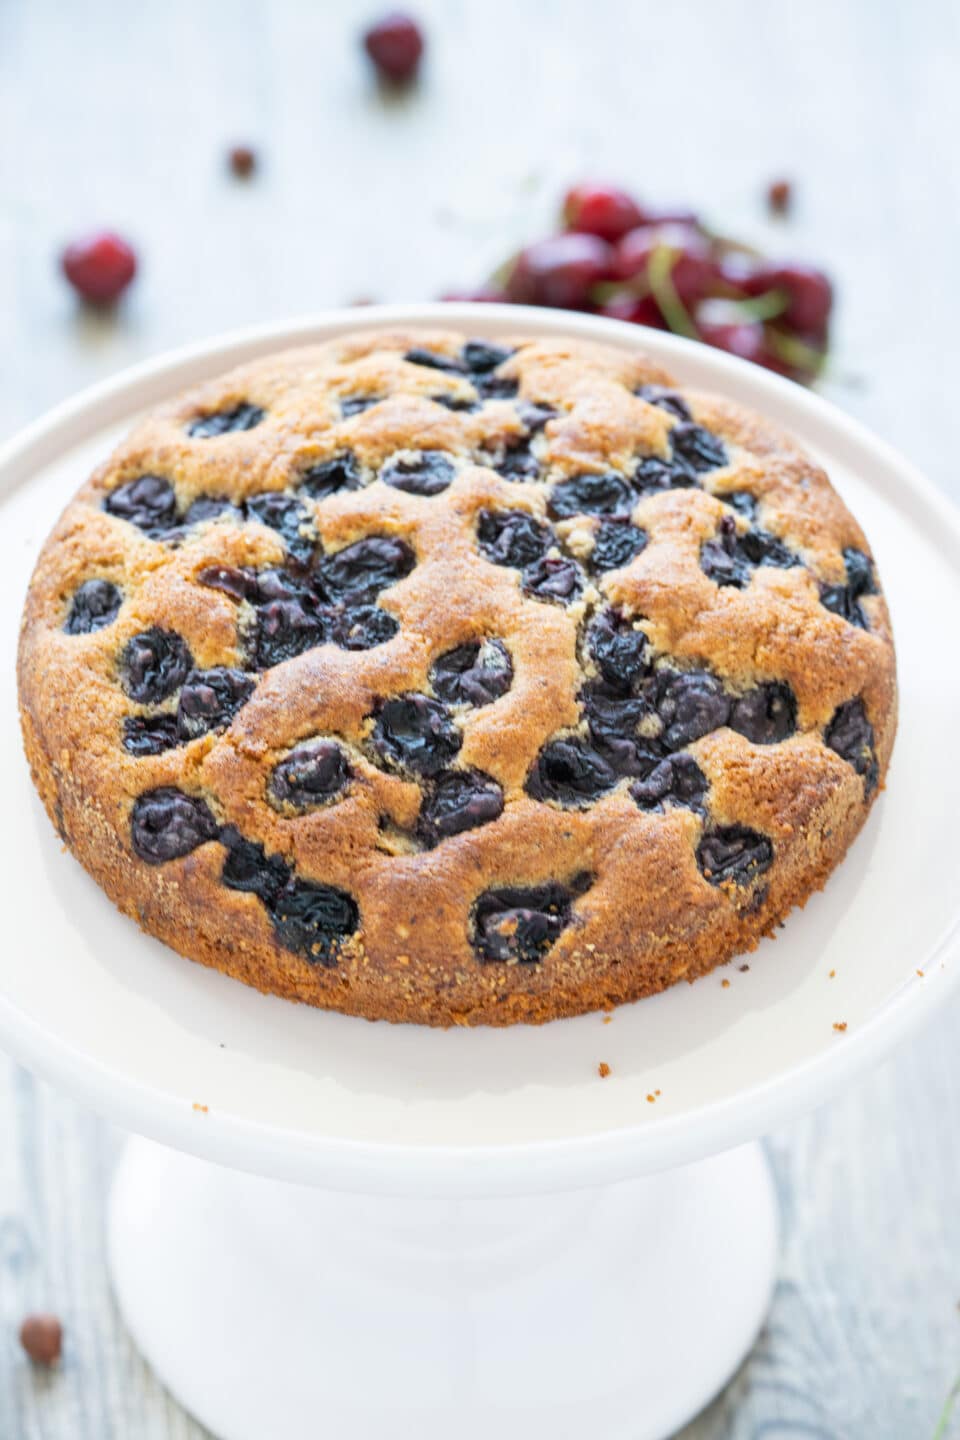 Cherry cake with nuts2